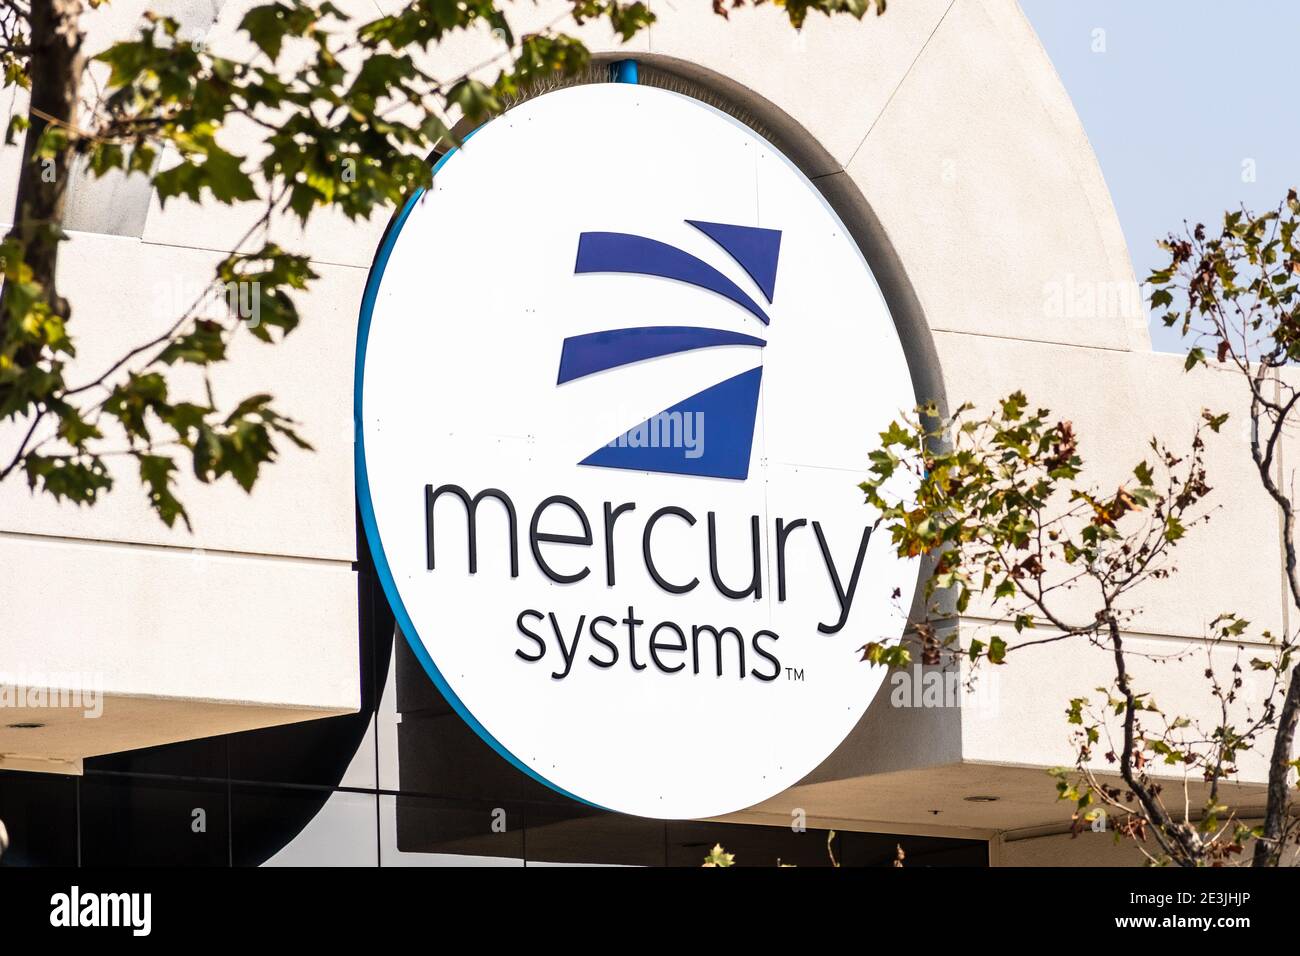 Sep 17, 2020 Fremont / CA / USA - Mercury Systems logo at their headquarters in Silicon Valley; Mercury Systems, Inc. is an American multinational aer Stock Photo